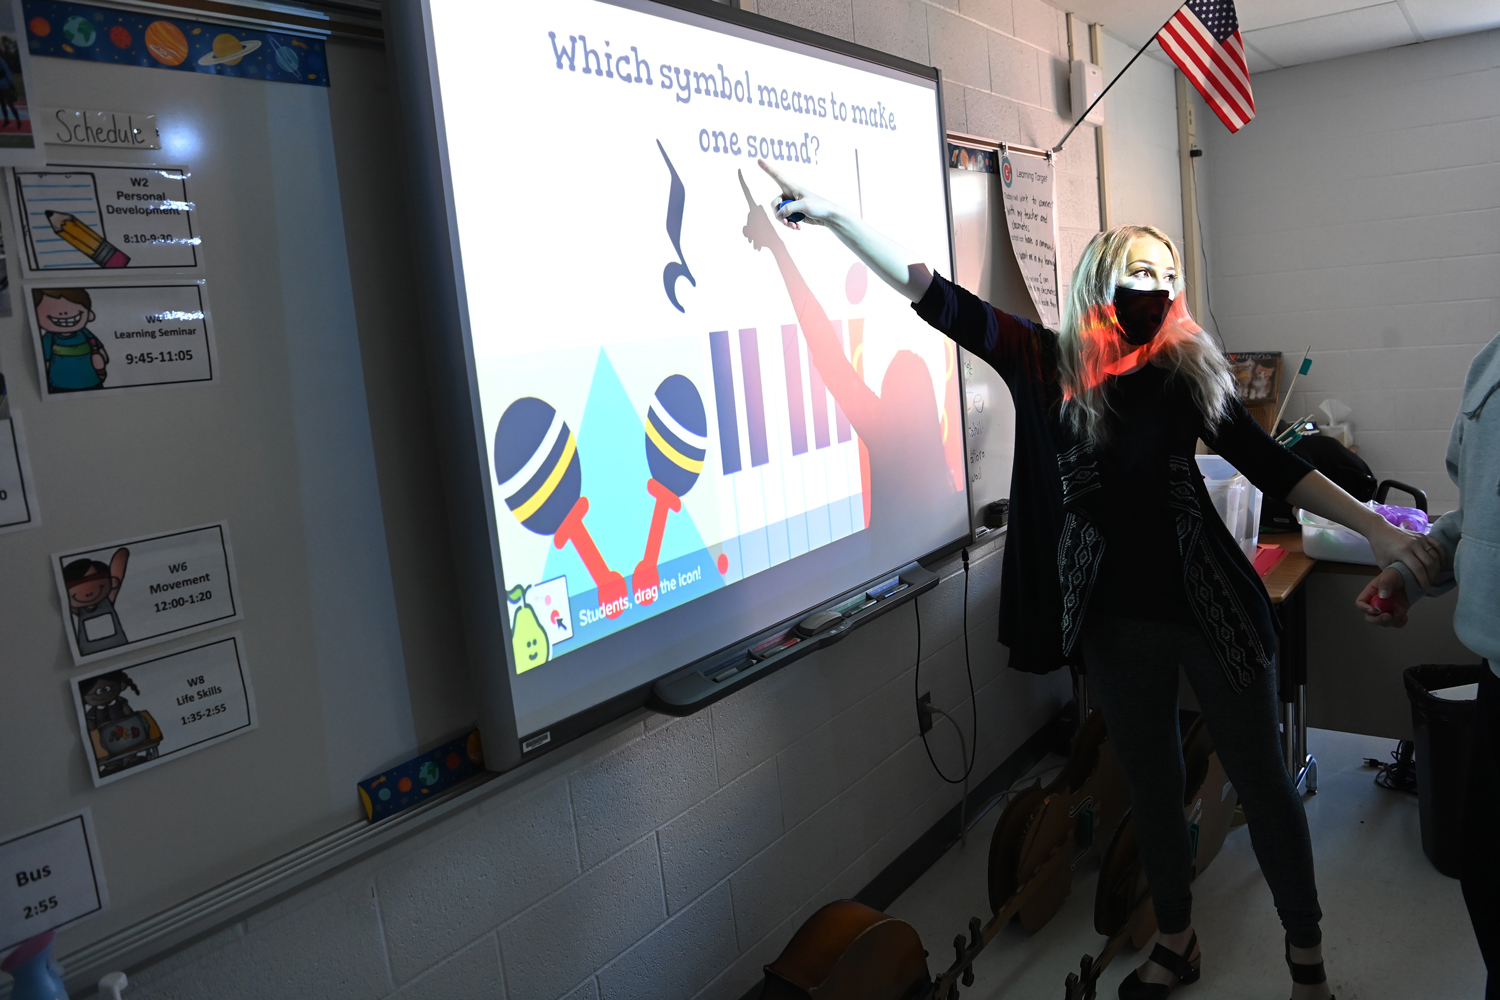 Annie Ray points to a screen that reads Which symbol is used to make one sound and shows several musical symbols.